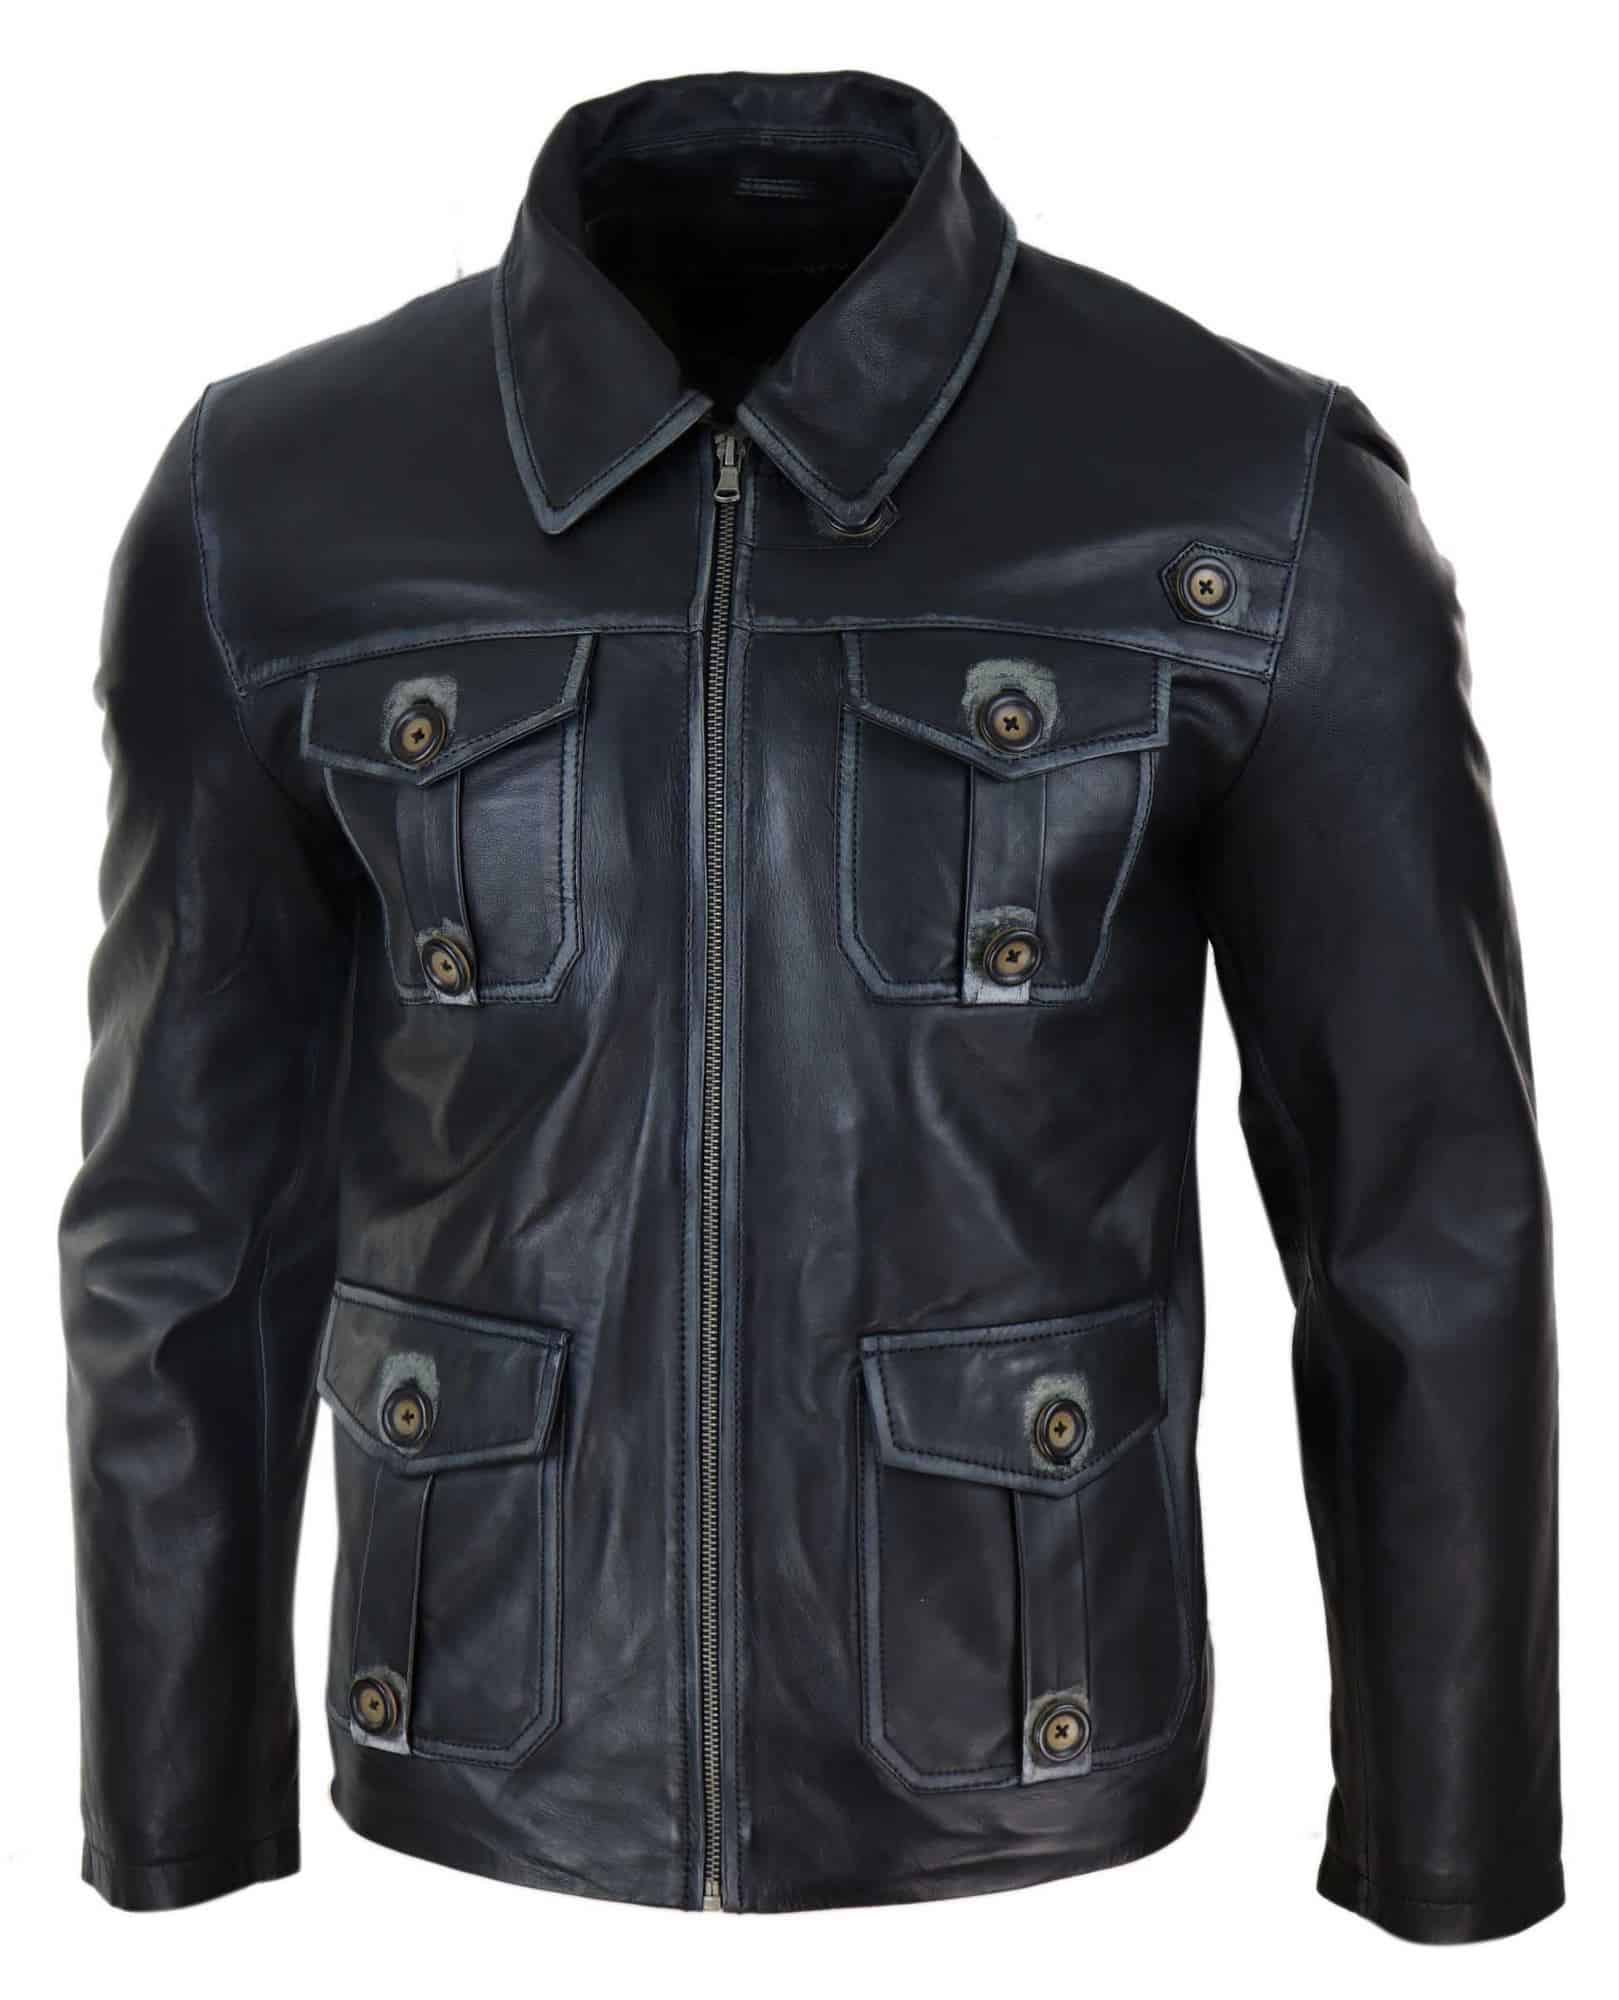 Mens Black Leather Jacket with Racing Stripes - Black Color | Happy ...